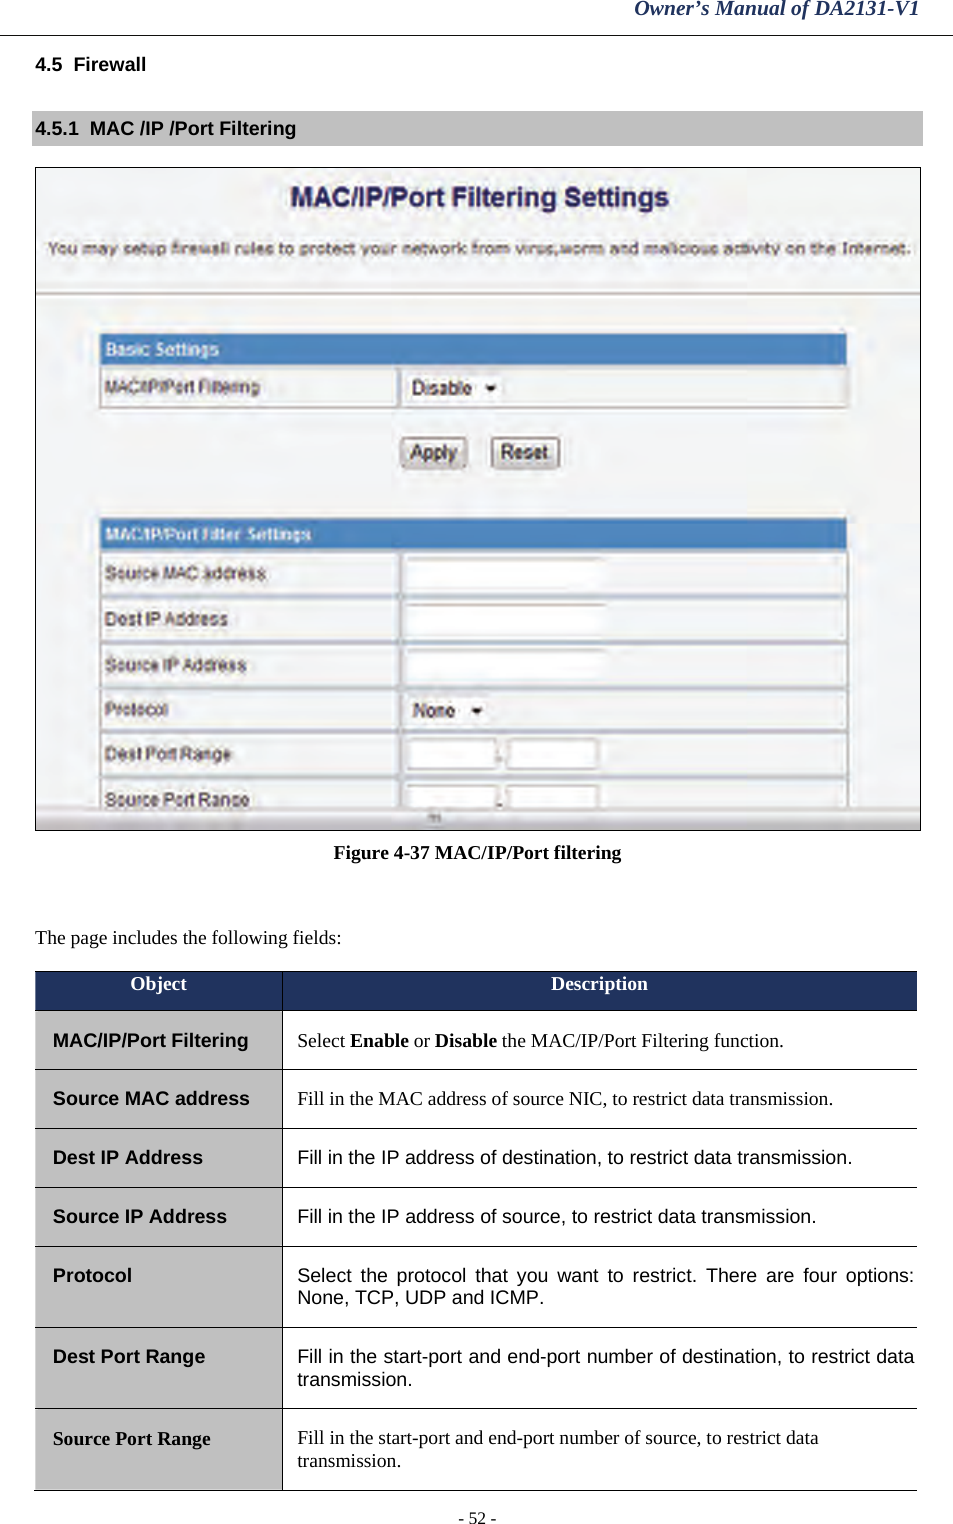 Owner’s Manual of DA2131-V1 - 52 - 4.5  Firewall 4.5.1  MAC /IP /Port Filtering    Figure 4-37 MAC/IP/Port filtering  The page includes the following fields: Object  Description MAC/IP/Port Filtering  Select Enable or Disable the MAC/IP/Port Filtering function. Source MAC address  Fill in the MAC address of source NIC, to restrict data transmission. Dest IP Address  Fill in the IP address of destination, to restrict data transmission. Source IP Address  Fill in the IP address of source, to restrict data transmission. Protocol  Select the protocol that you want to restrict. There are four options: None, TCP, UDP and ICMP. Dest Port Range  Fill in the start-port and end-port number of destination, to restrict data transmission. Source Port Range  Fill in the start-port and end-port number of source, to restrict data transmission. 